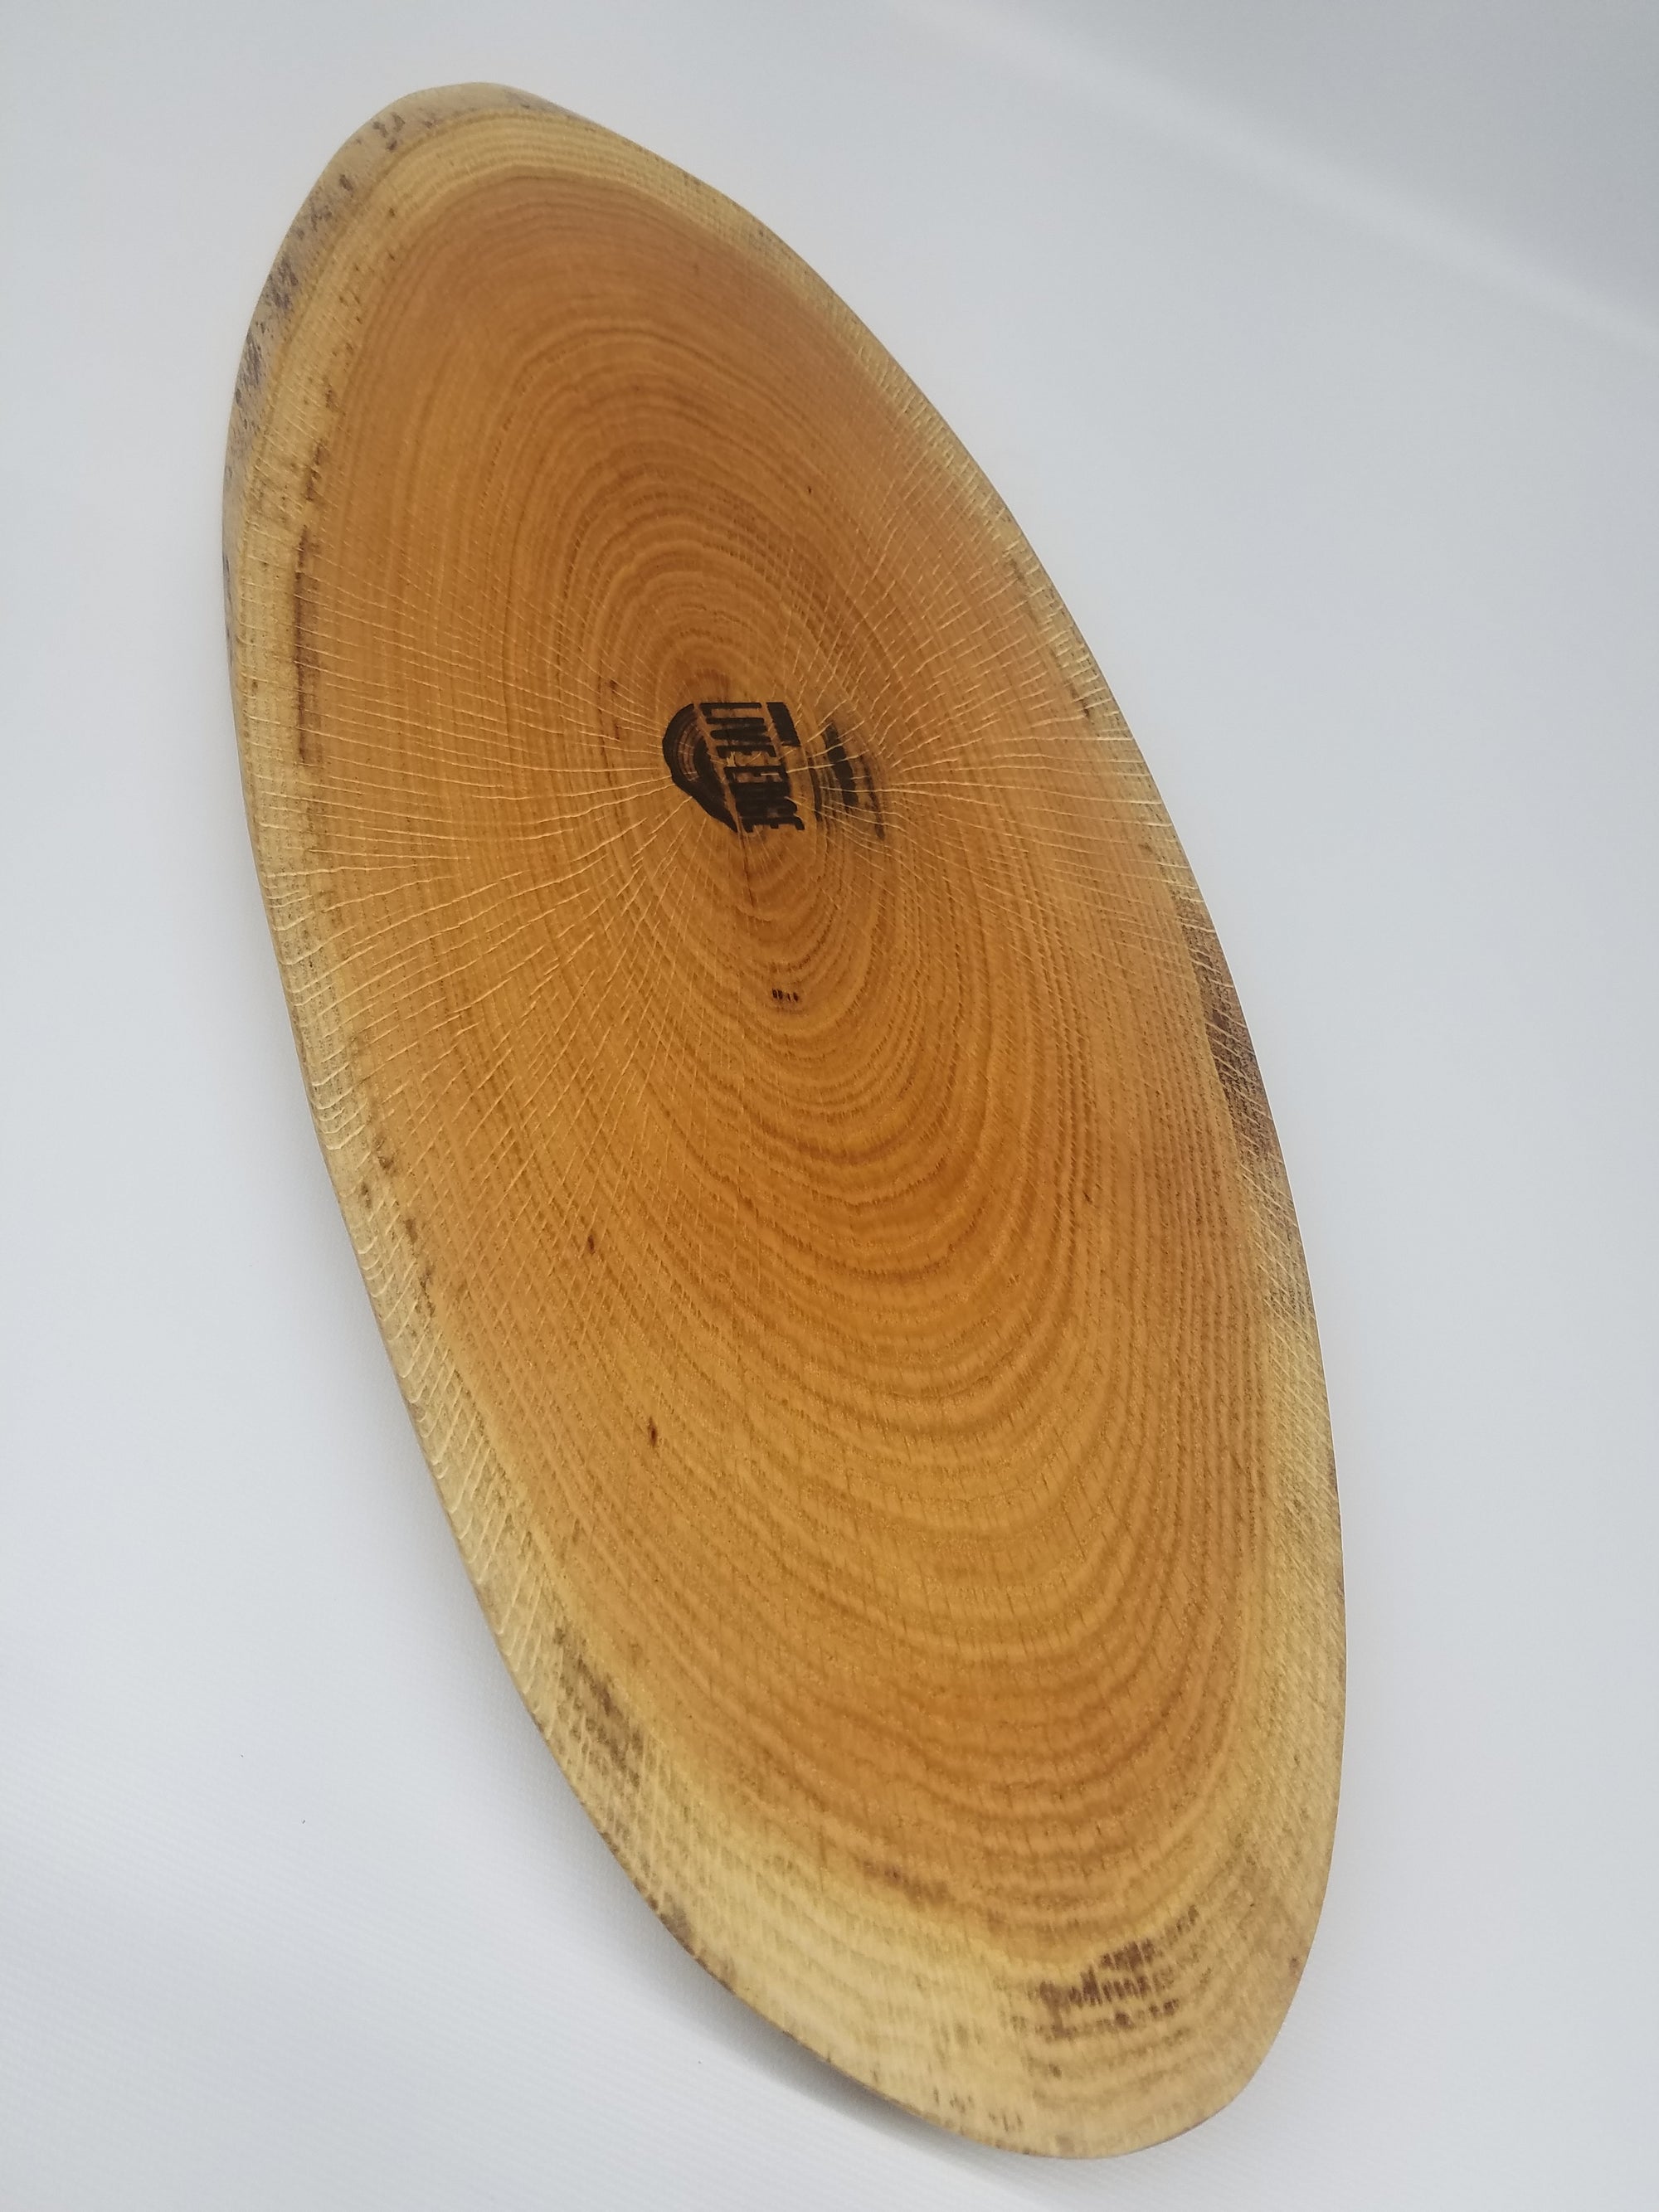 Large Wooden Serving Platter- Charcuterie Board- Table Centerpiece- Long and Narrow- Natural Wood- Serving Board- Food Safe- Live Edge Slab